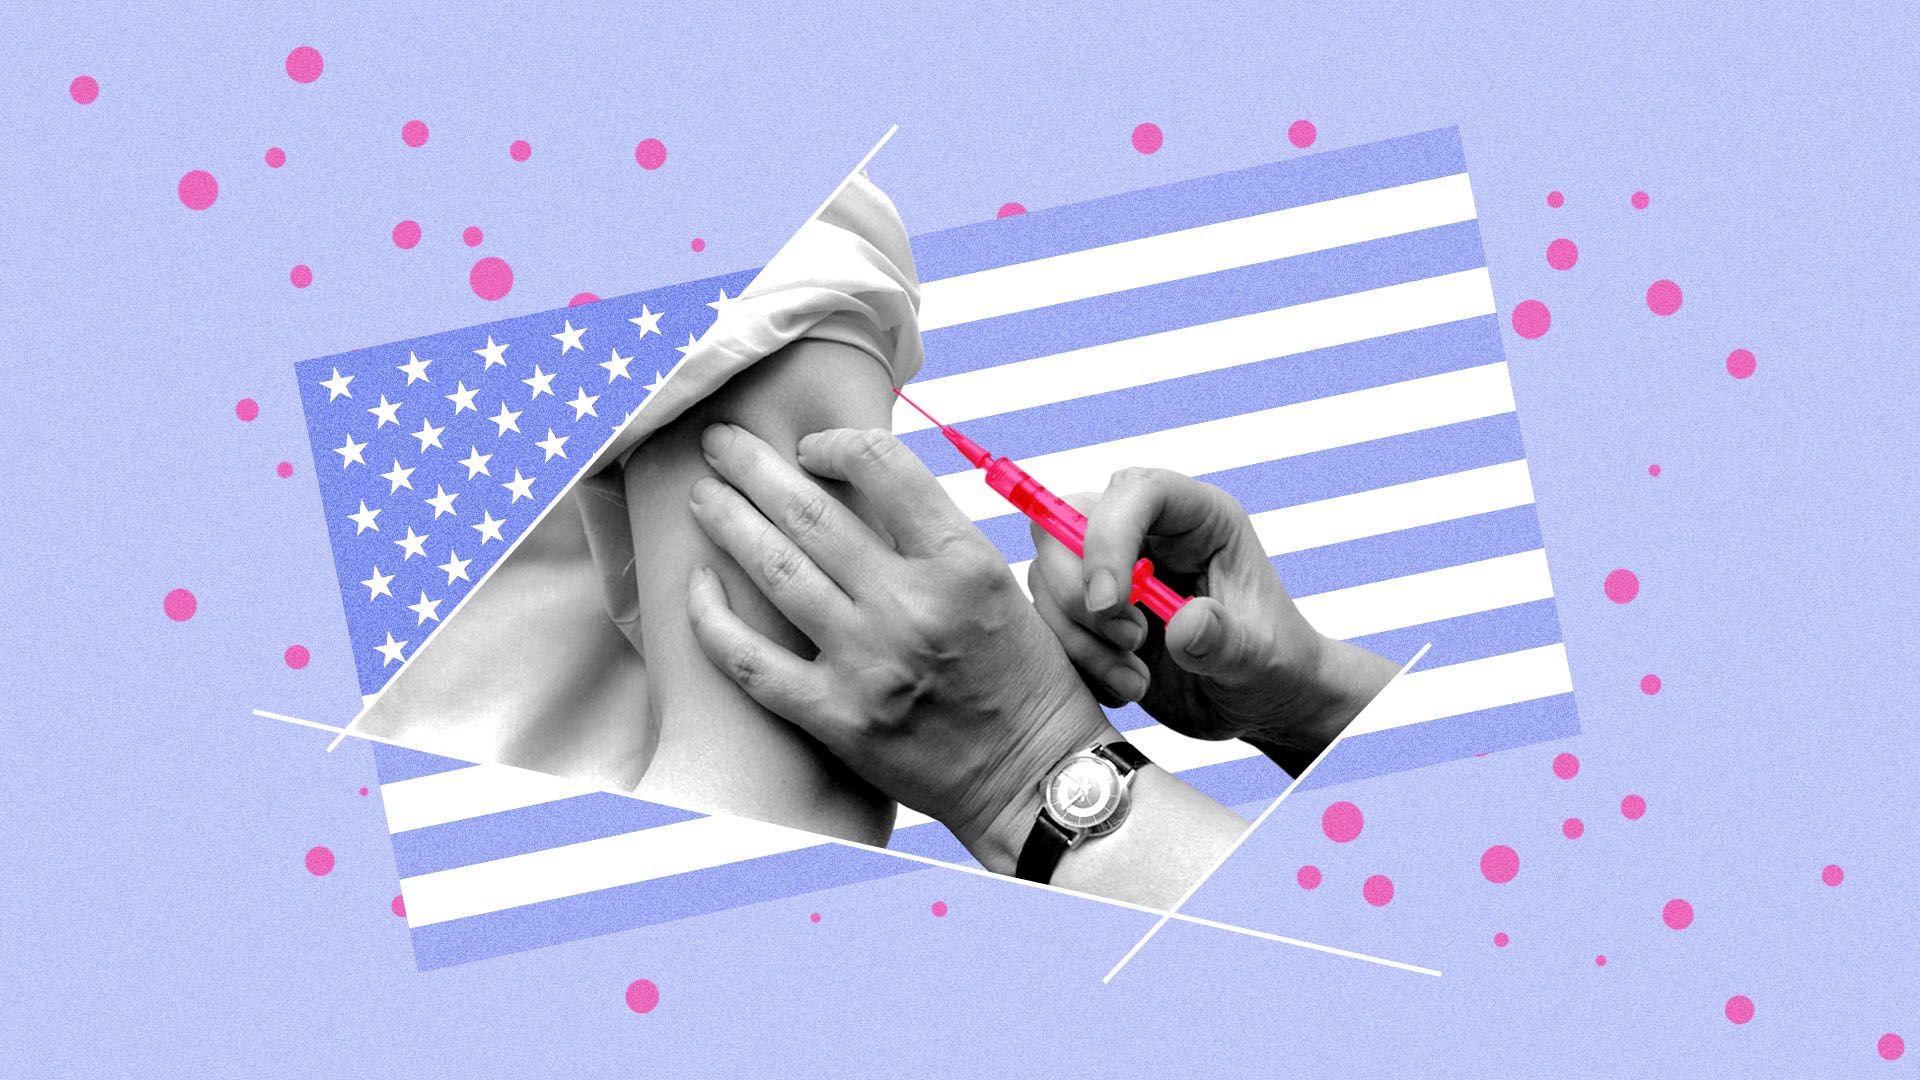 Collage of an arm receiving a vaccination shot over an American flag, with measles dots scattered throughout